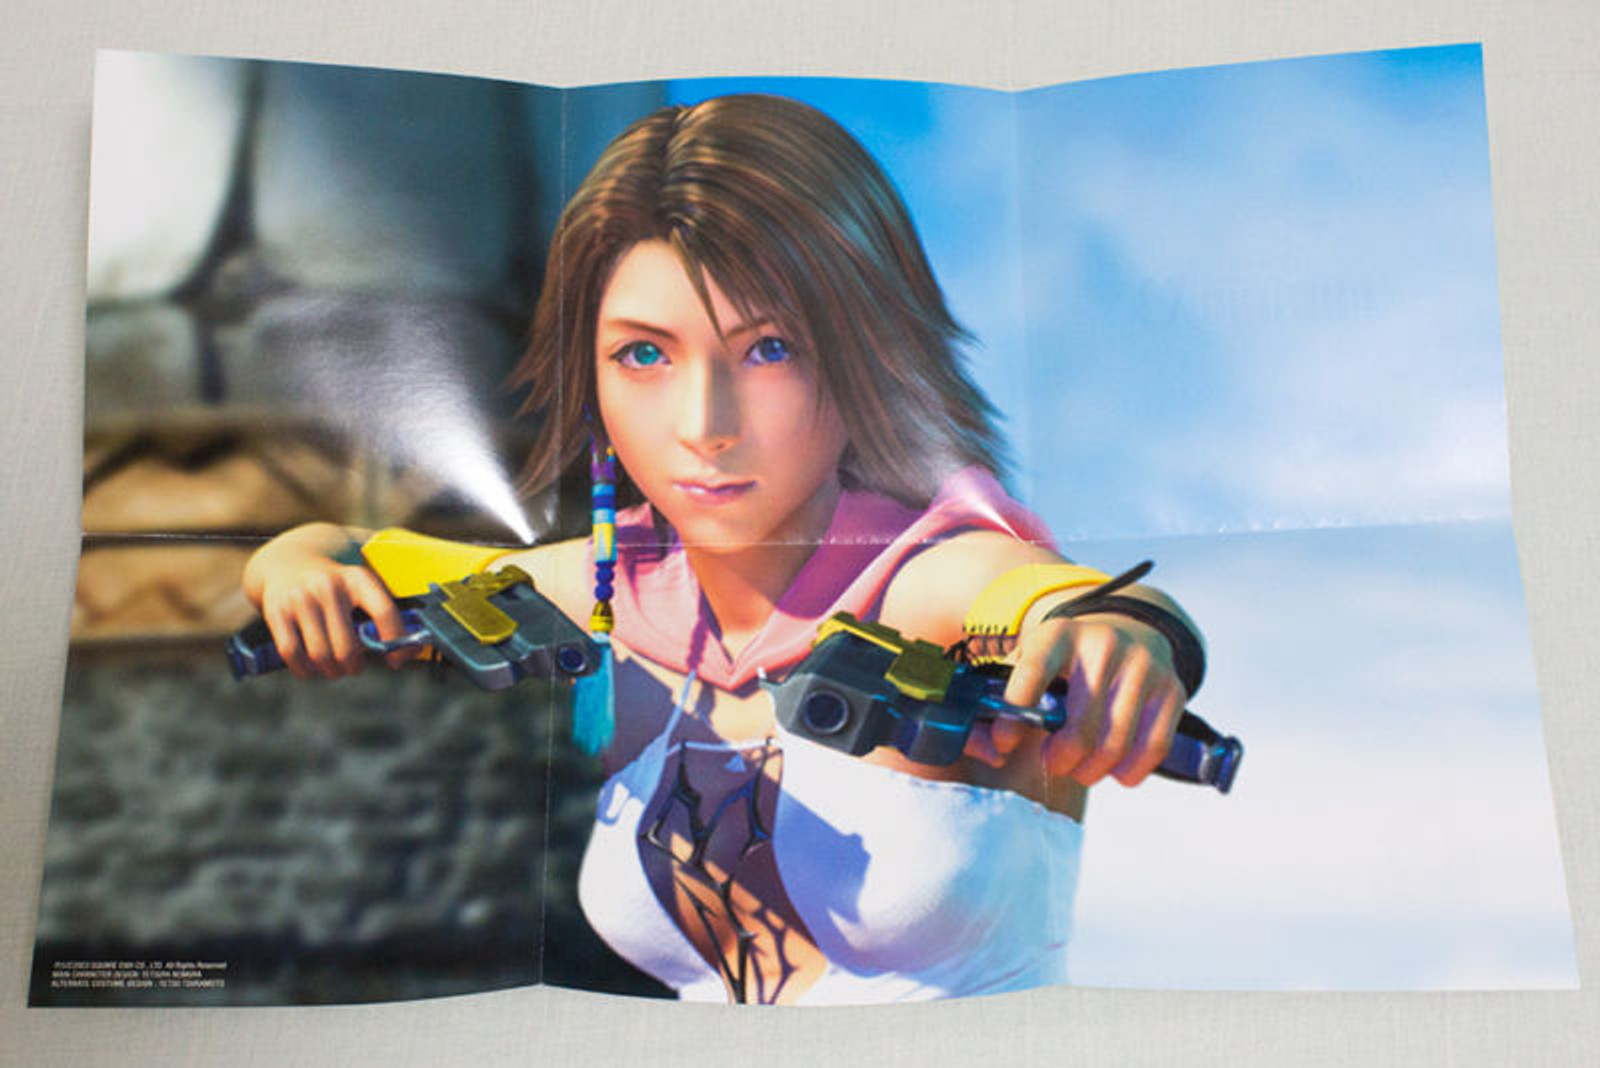 Final Fantasy X Yuna/Rikku/Paine Poster for Sale by CassidyCreates